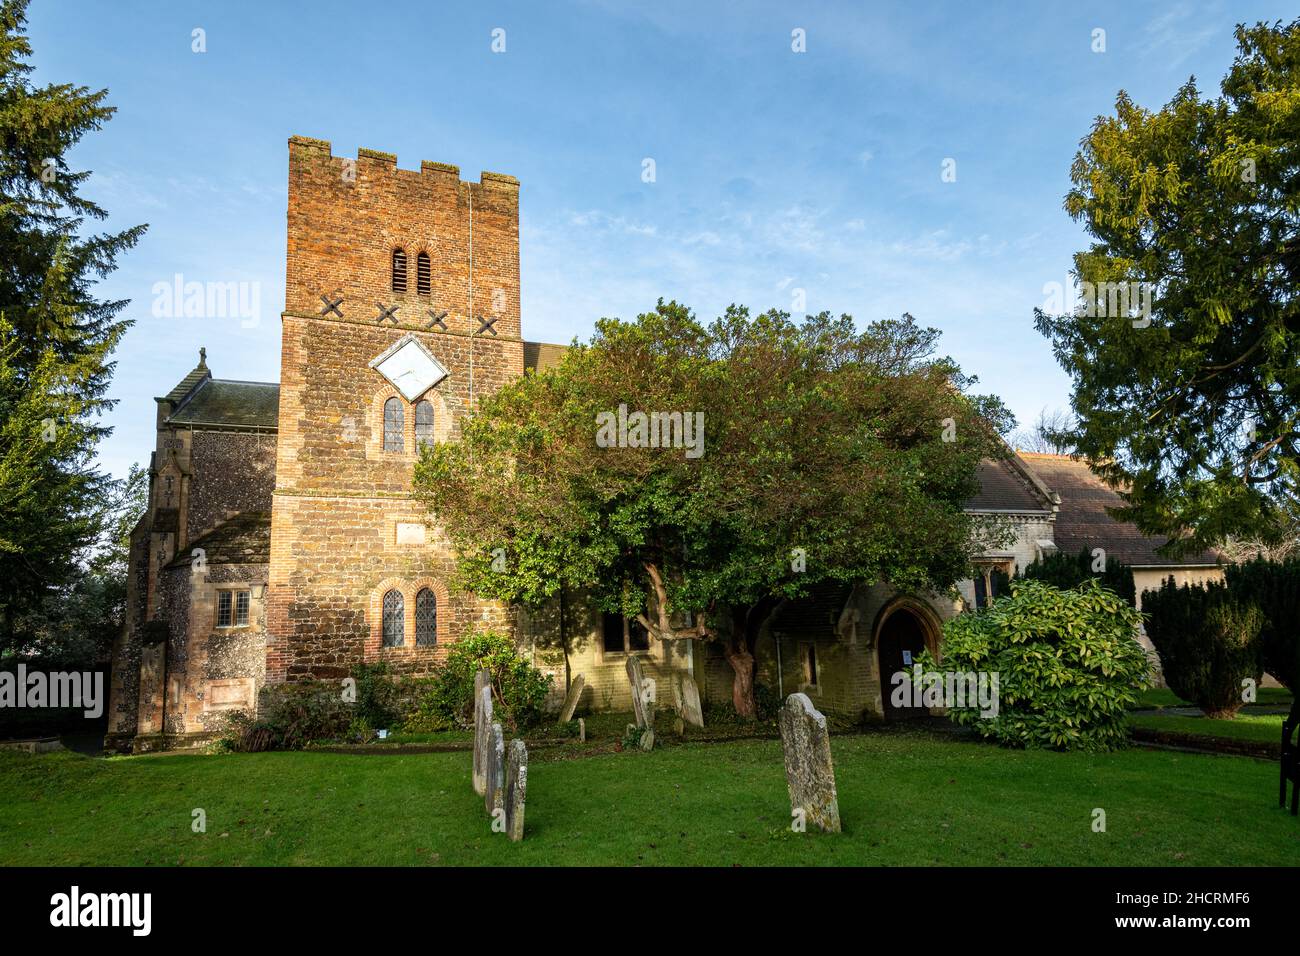 Church of St Michael the Archangel in Aldershot town, Hampshire, England, UK Stock Photo